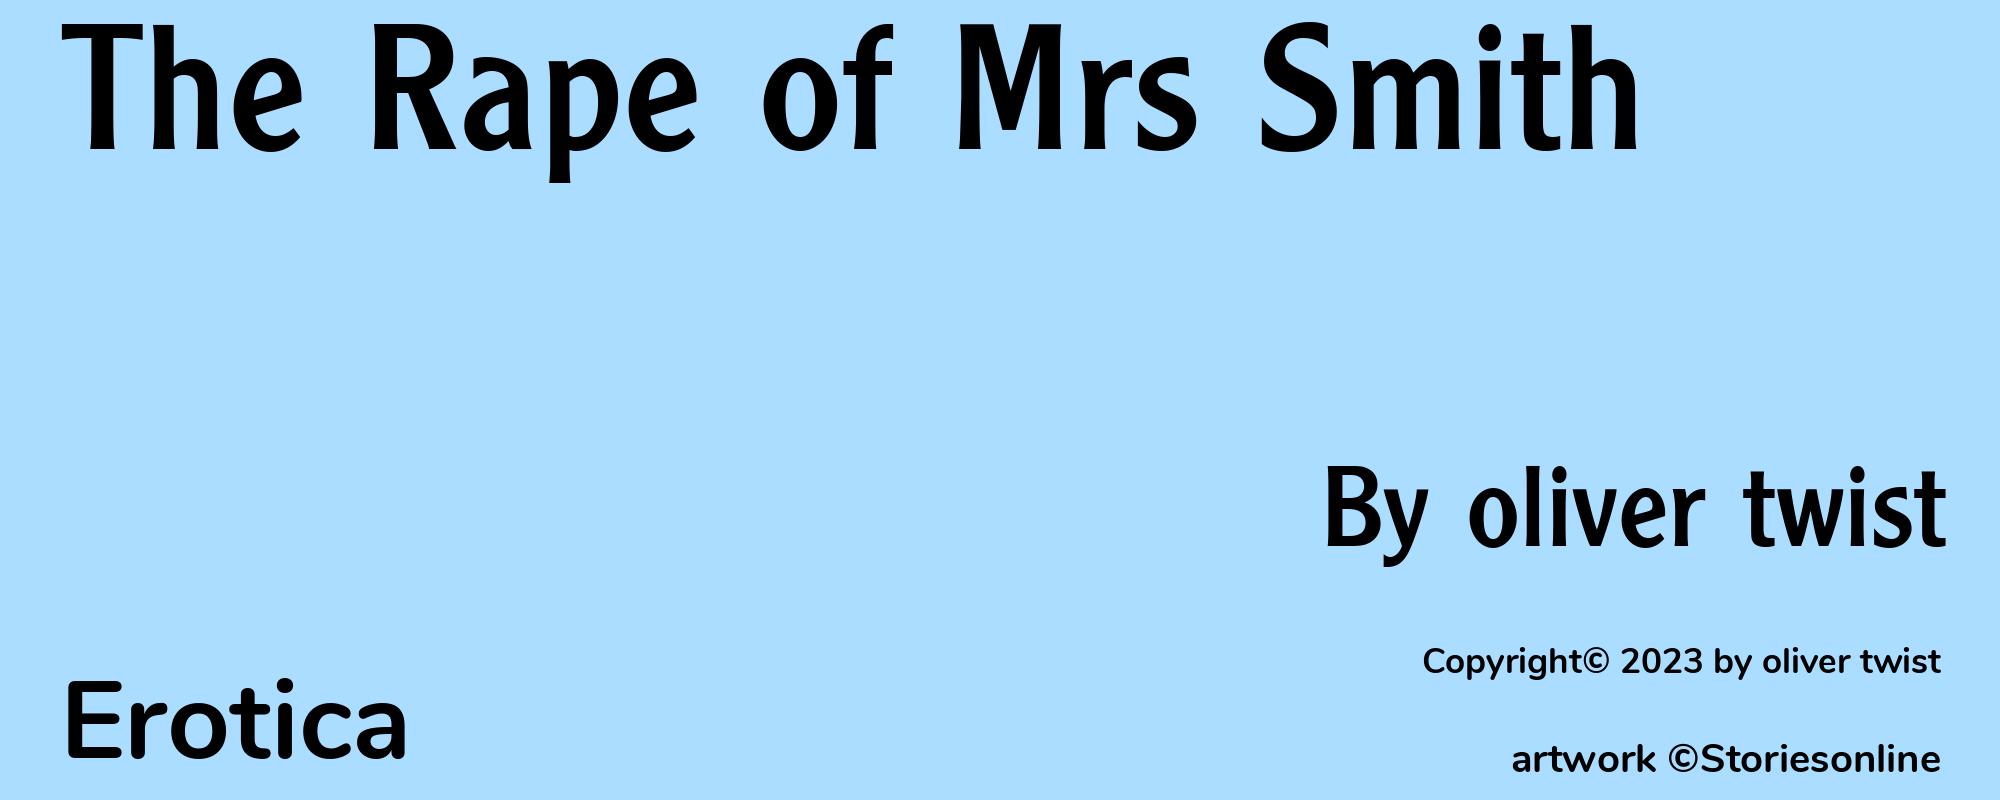 The Rape of Mrs Smith - Cover